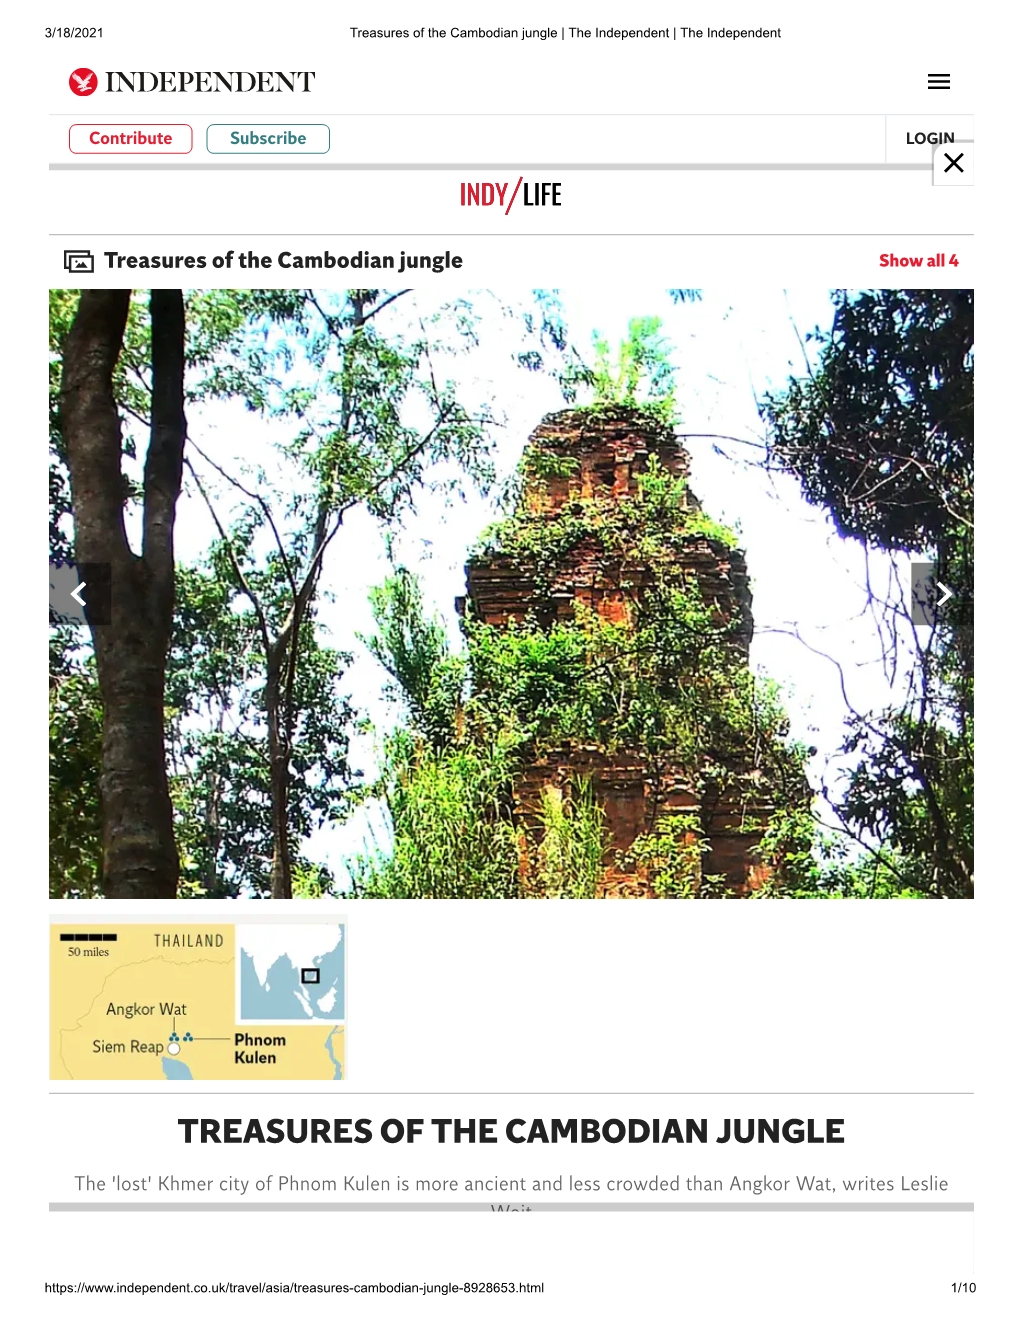 Treasures of the Cambodian Jungle | the Independent | the Independent